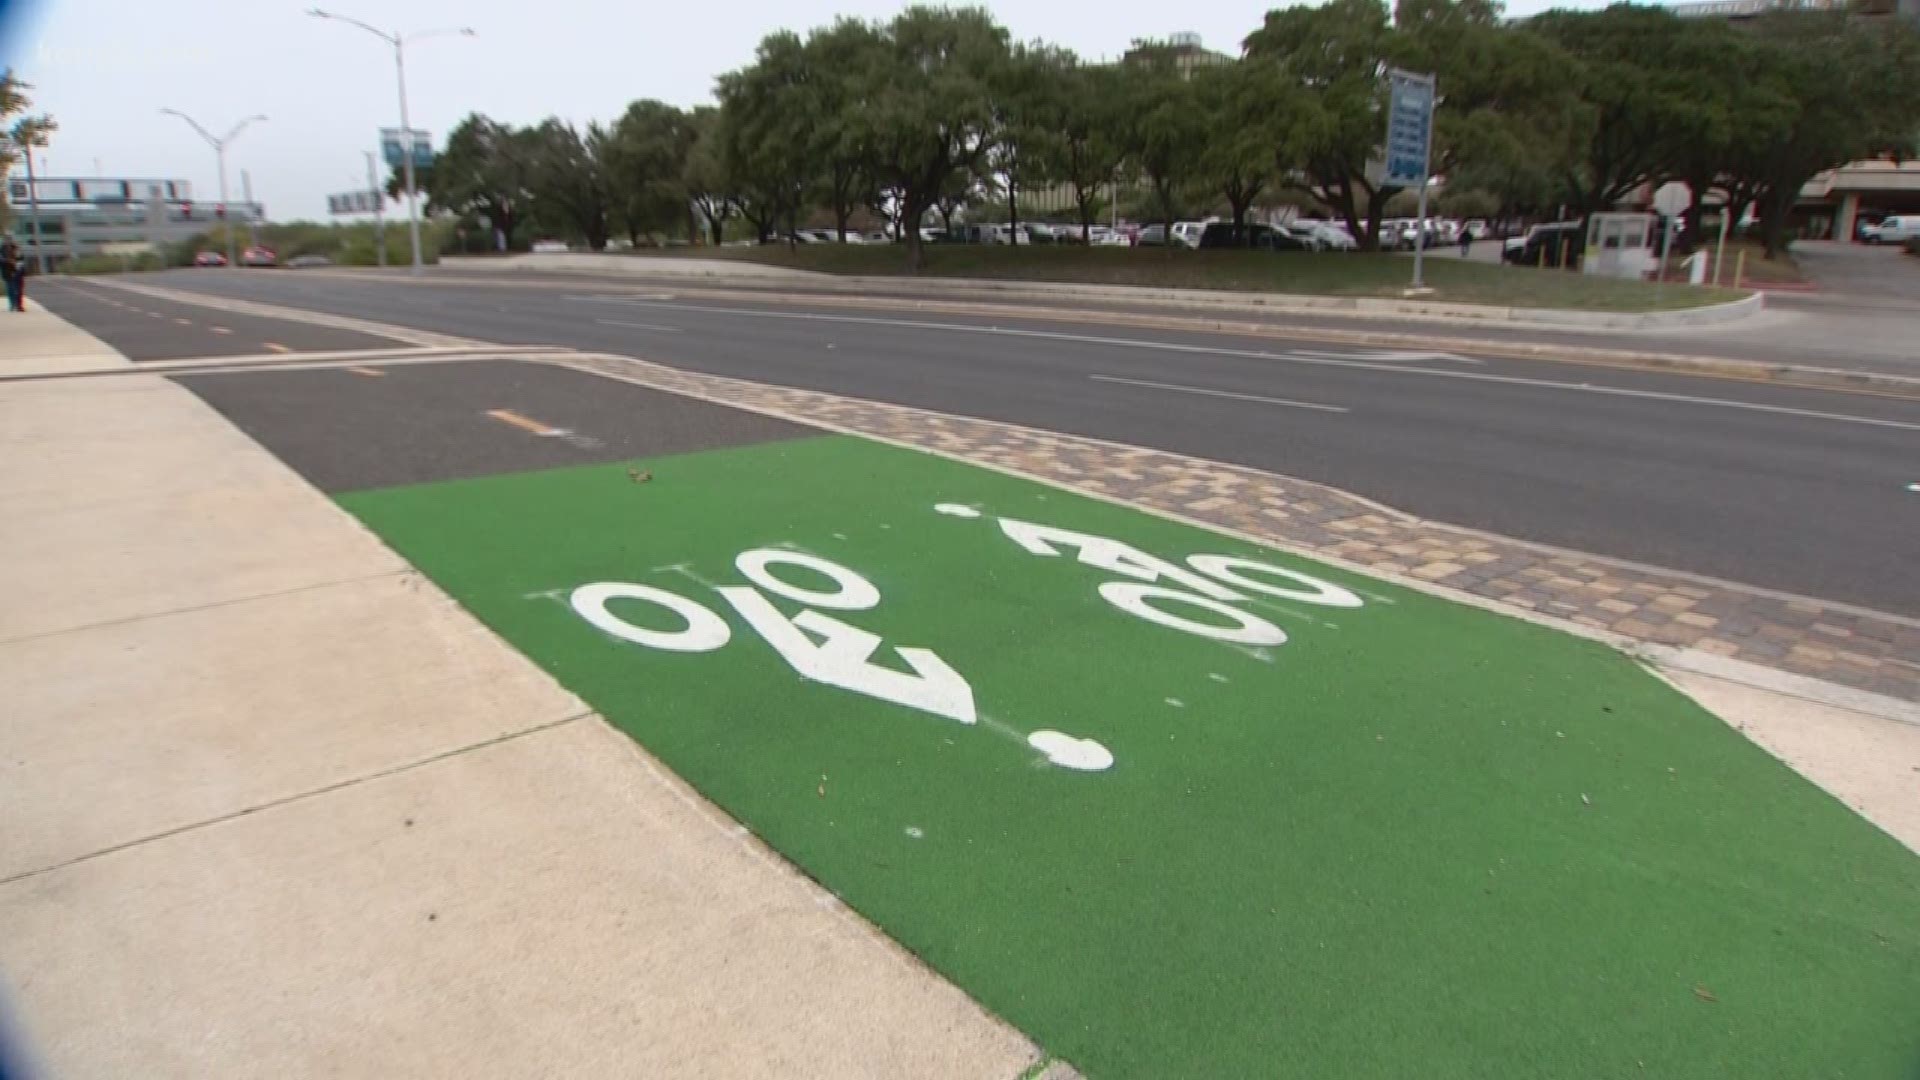 This bike path is like no other in the city. Eyewitness News Reporter Sharon Ko is at the trail on Floyd Curl with more information.